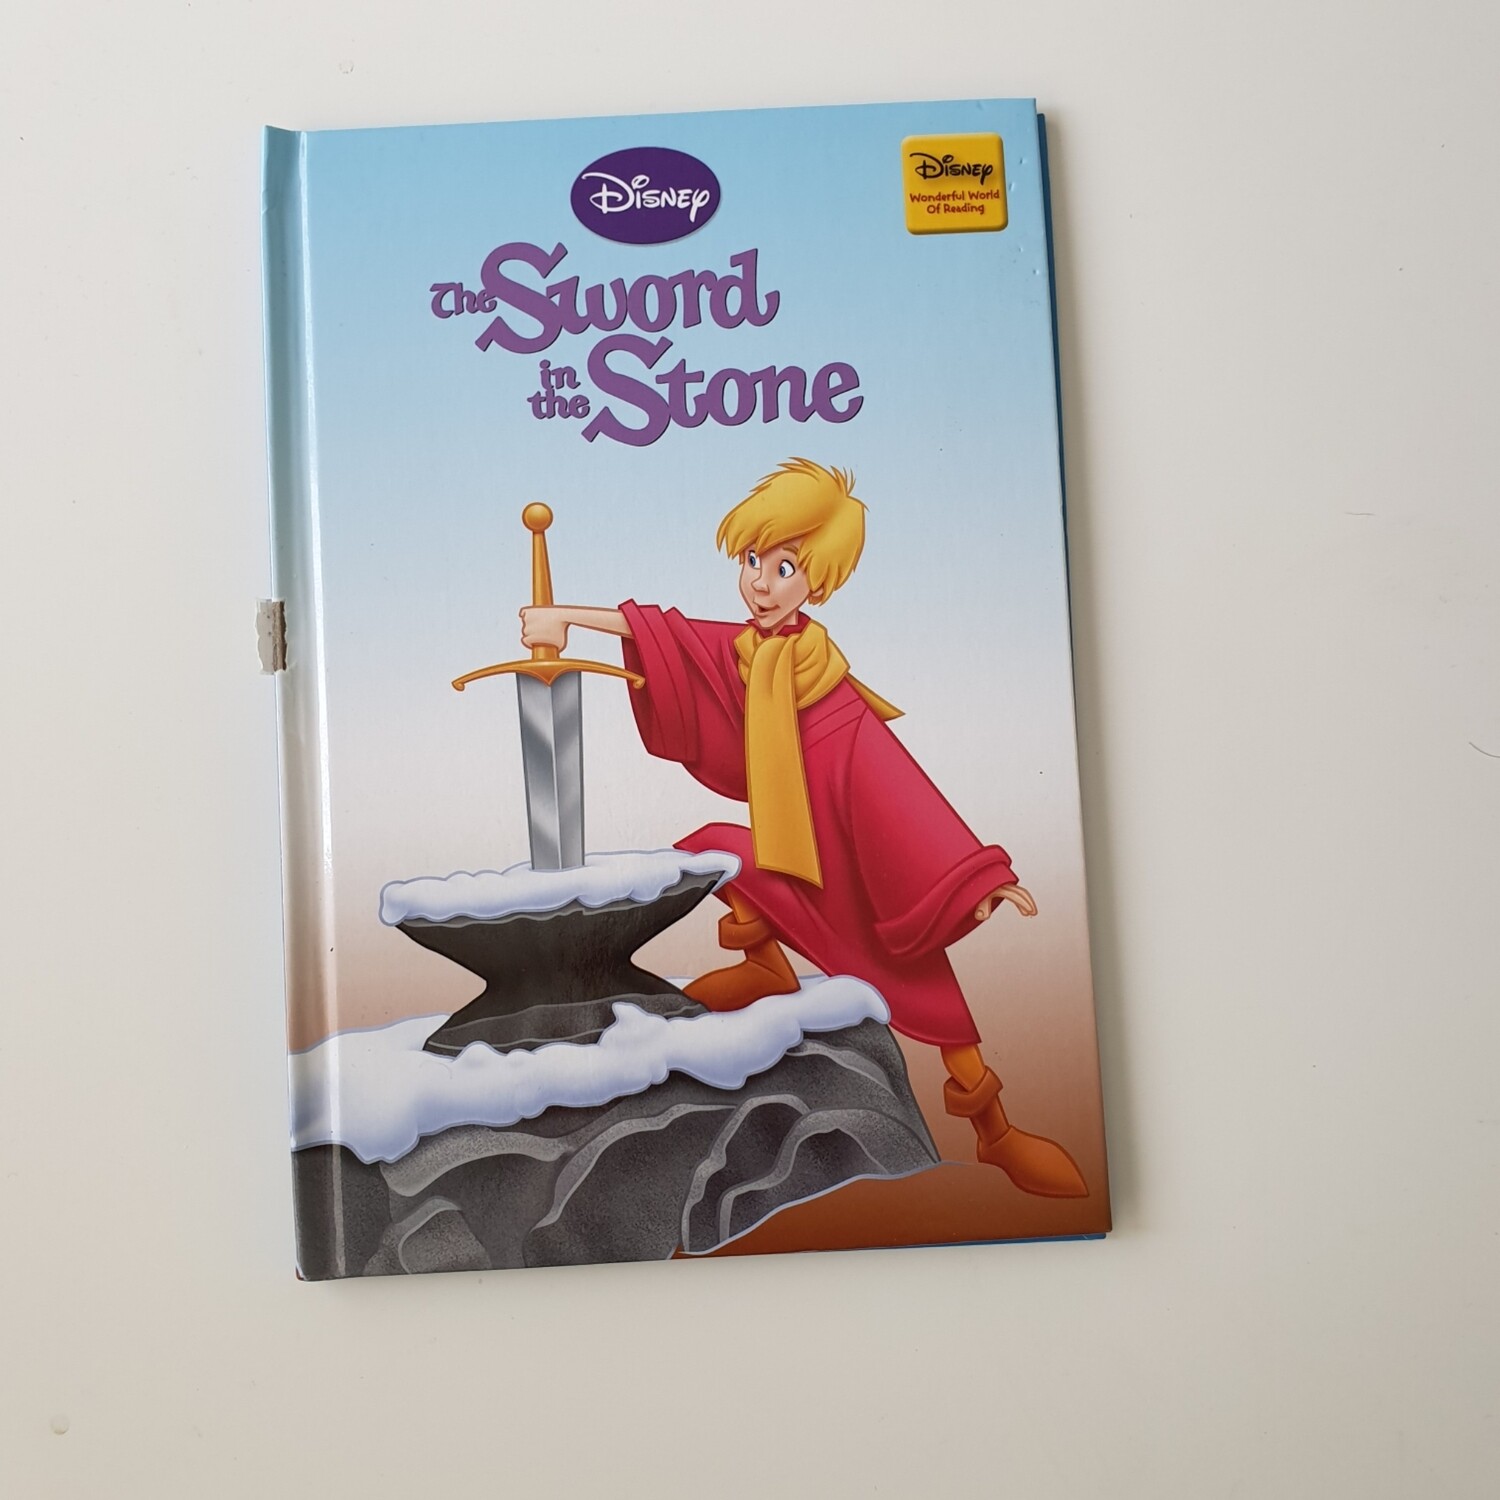 Sword in the Stone Notebook 